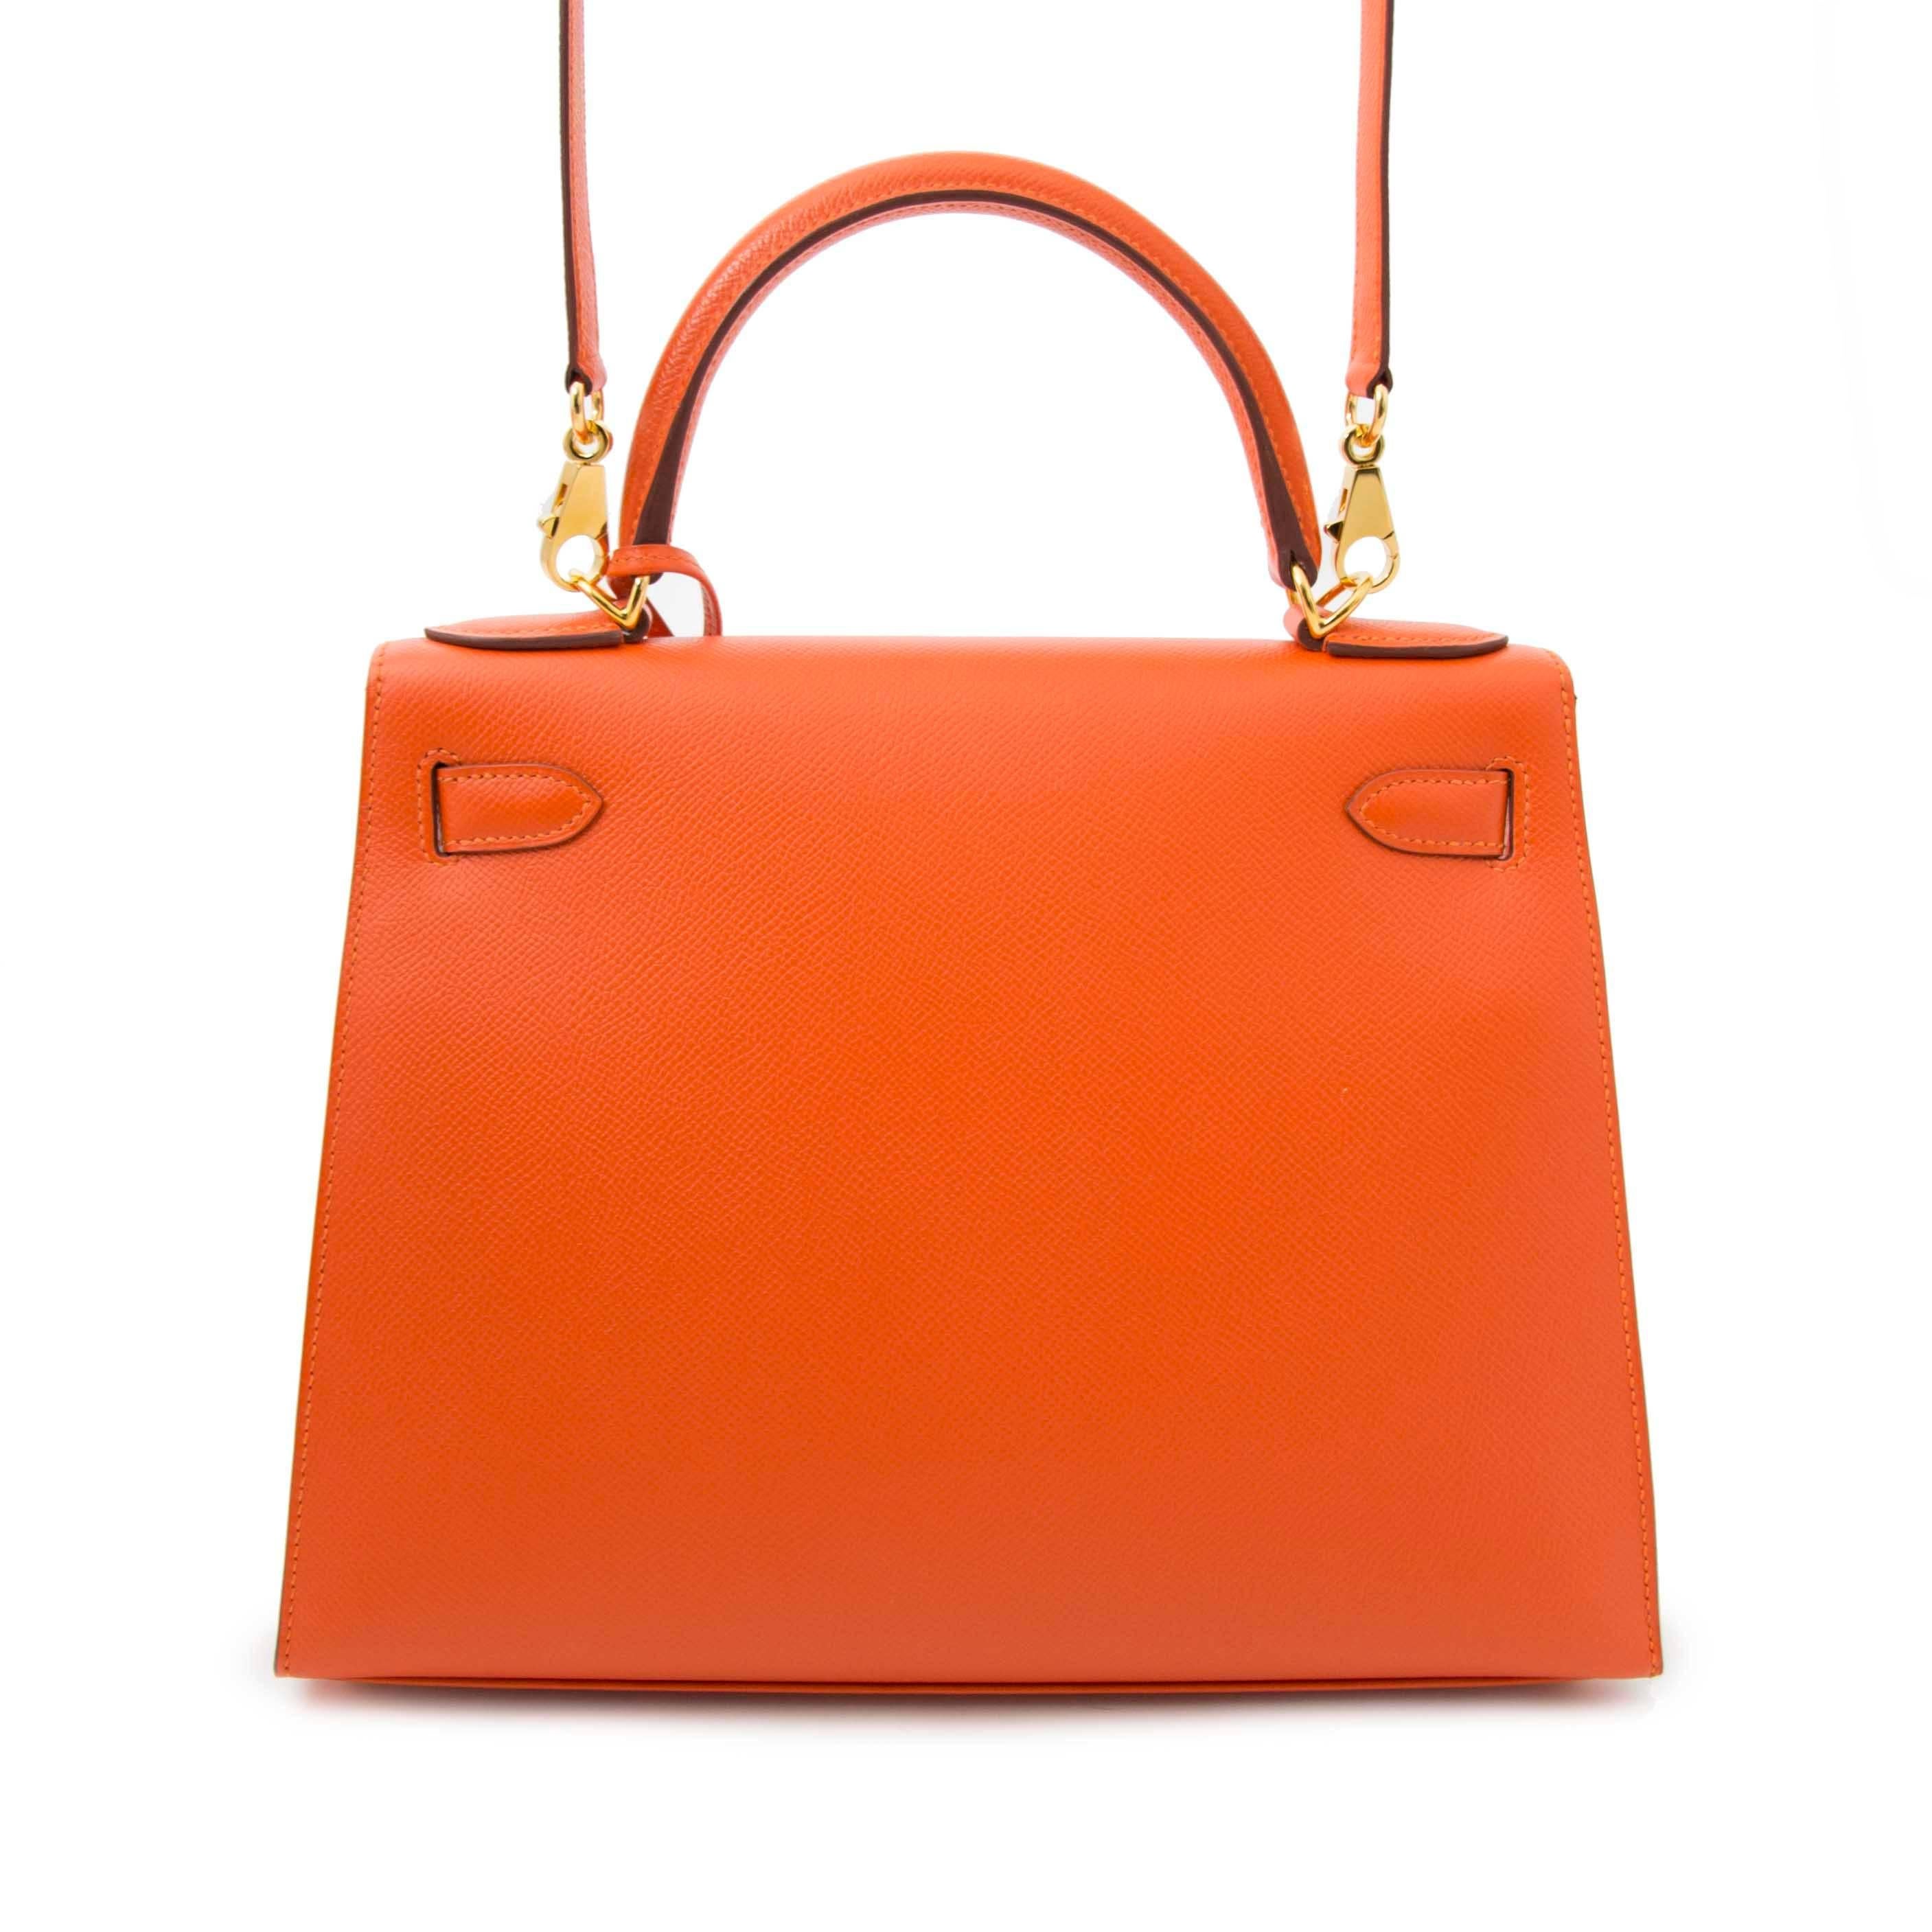  Hermes Kelly Sellier 28 Epsom Feu

Only worn once or twice Iconic Hermès Kelly 28 Epsom.
This compressed type of epsom leather holds true to its shape in all instances and is completely resilient to scratches.
This vibrant feu color, together with